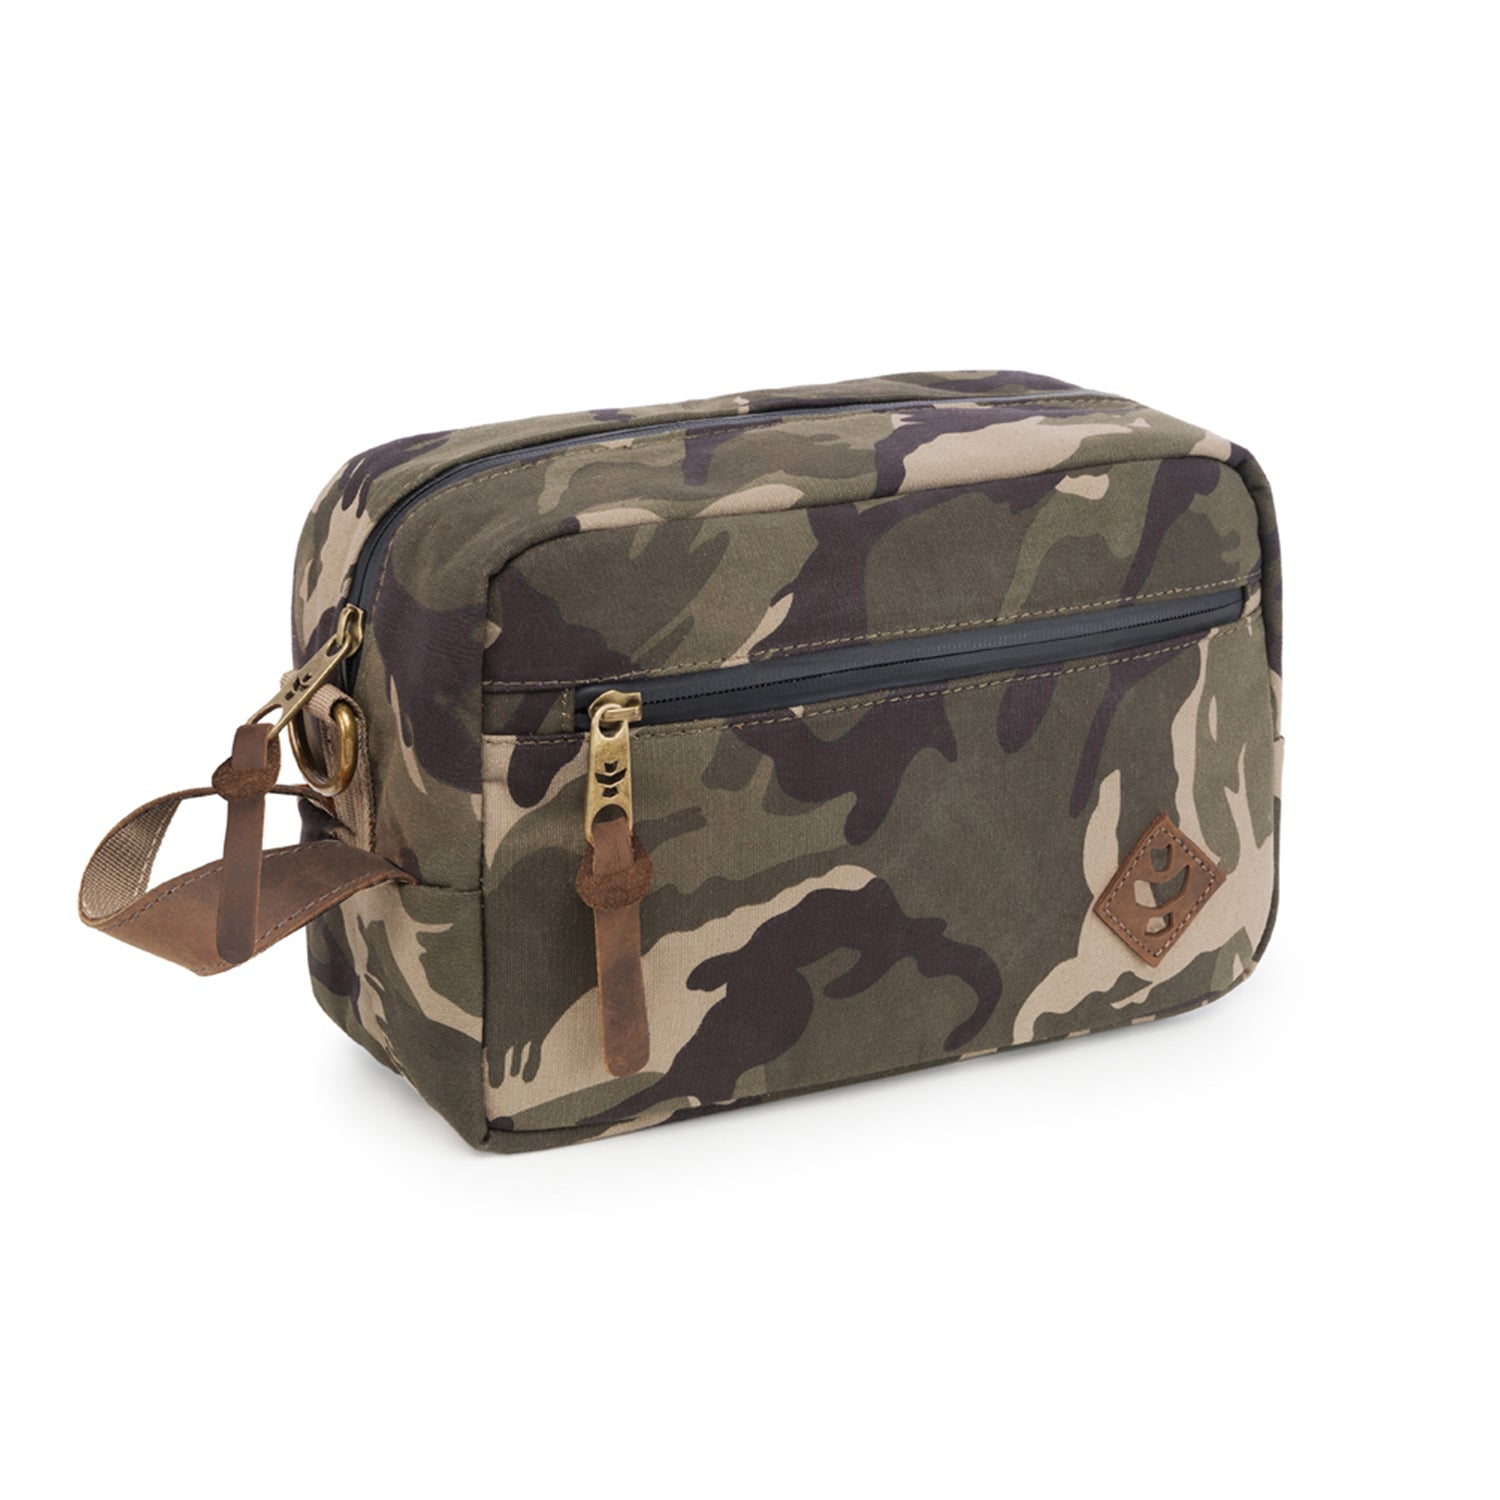 Camo Brown Canvas Smell Proof Water Resistant Toiletry Dopp Kit Bag